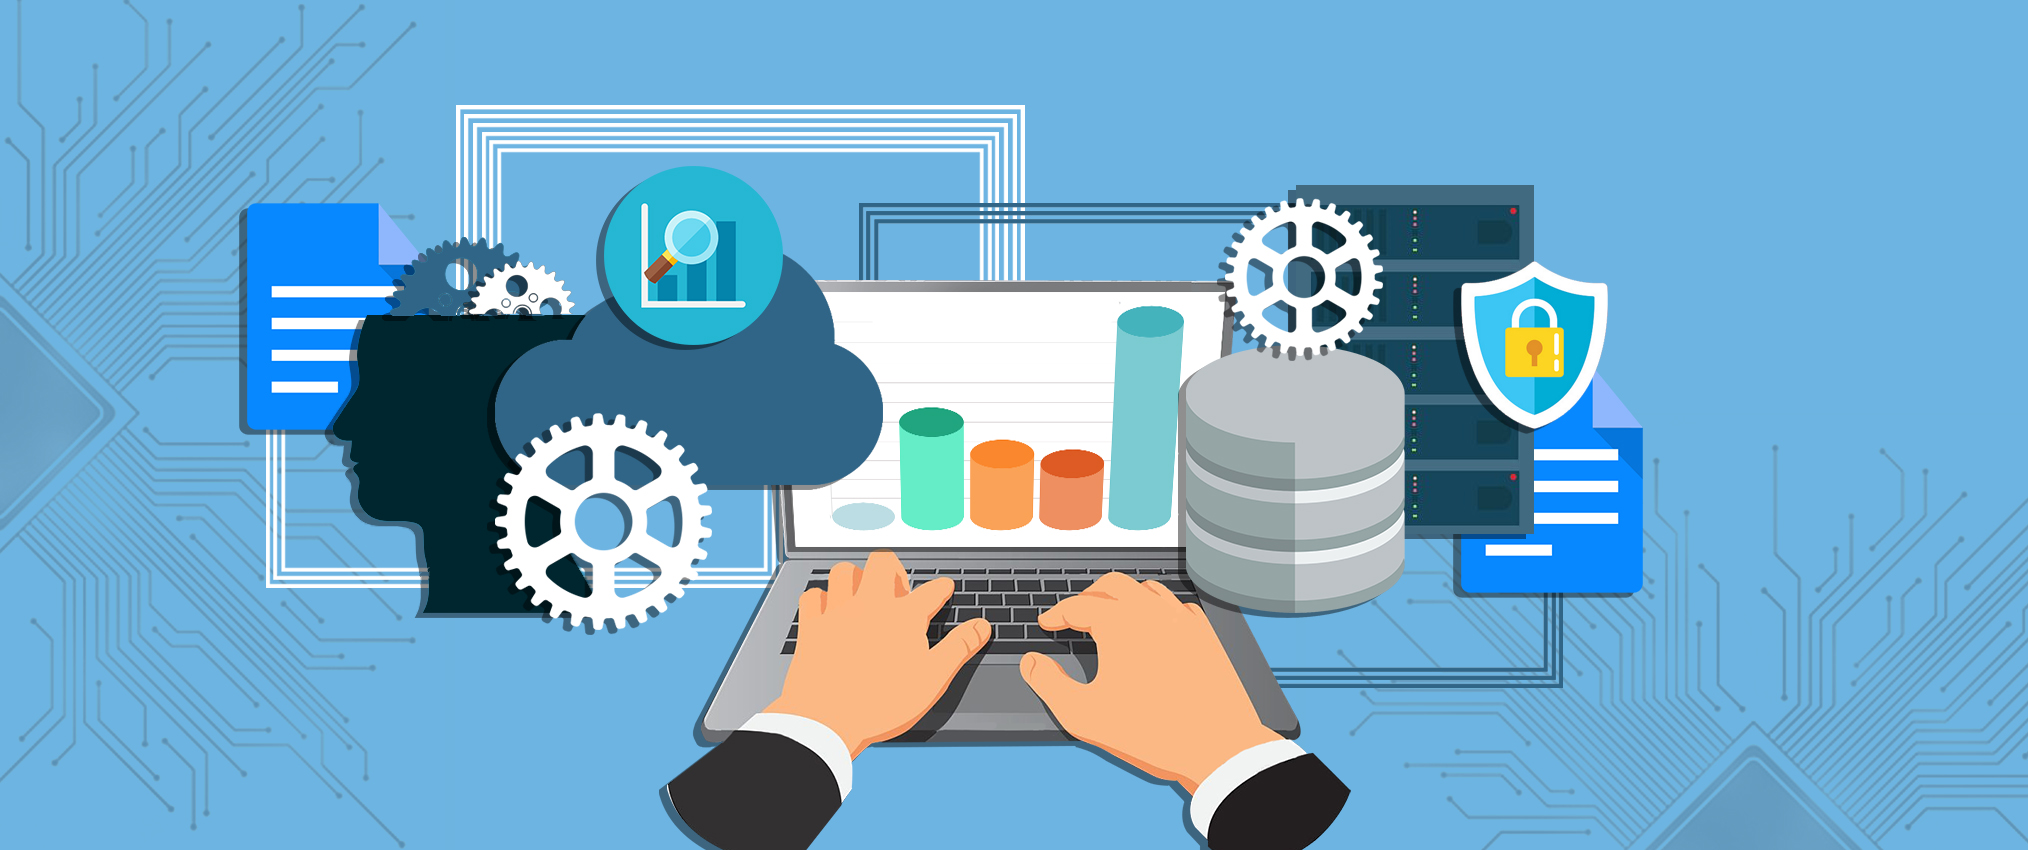 Change your business with organized Data Processing Services